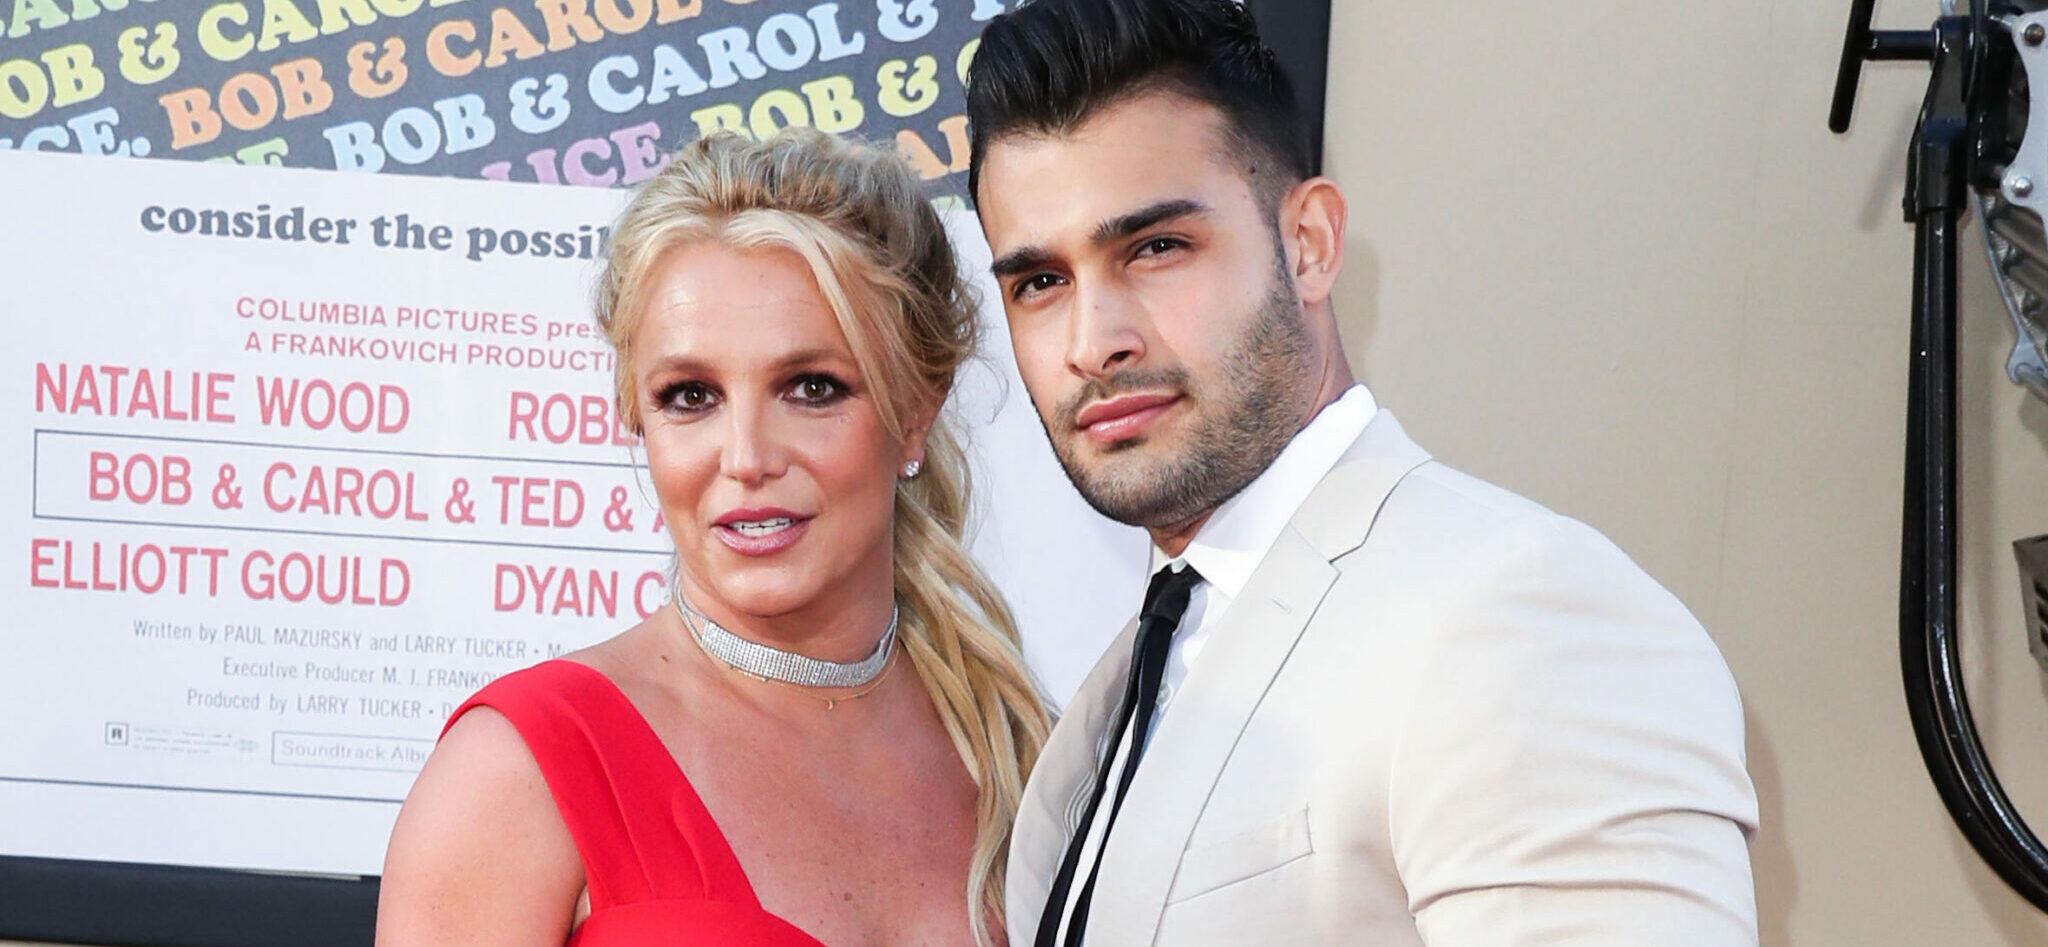 Britney Spears Wants To Explain Why Sam Asghari Marriage ‘Broke Down’ In Second Book